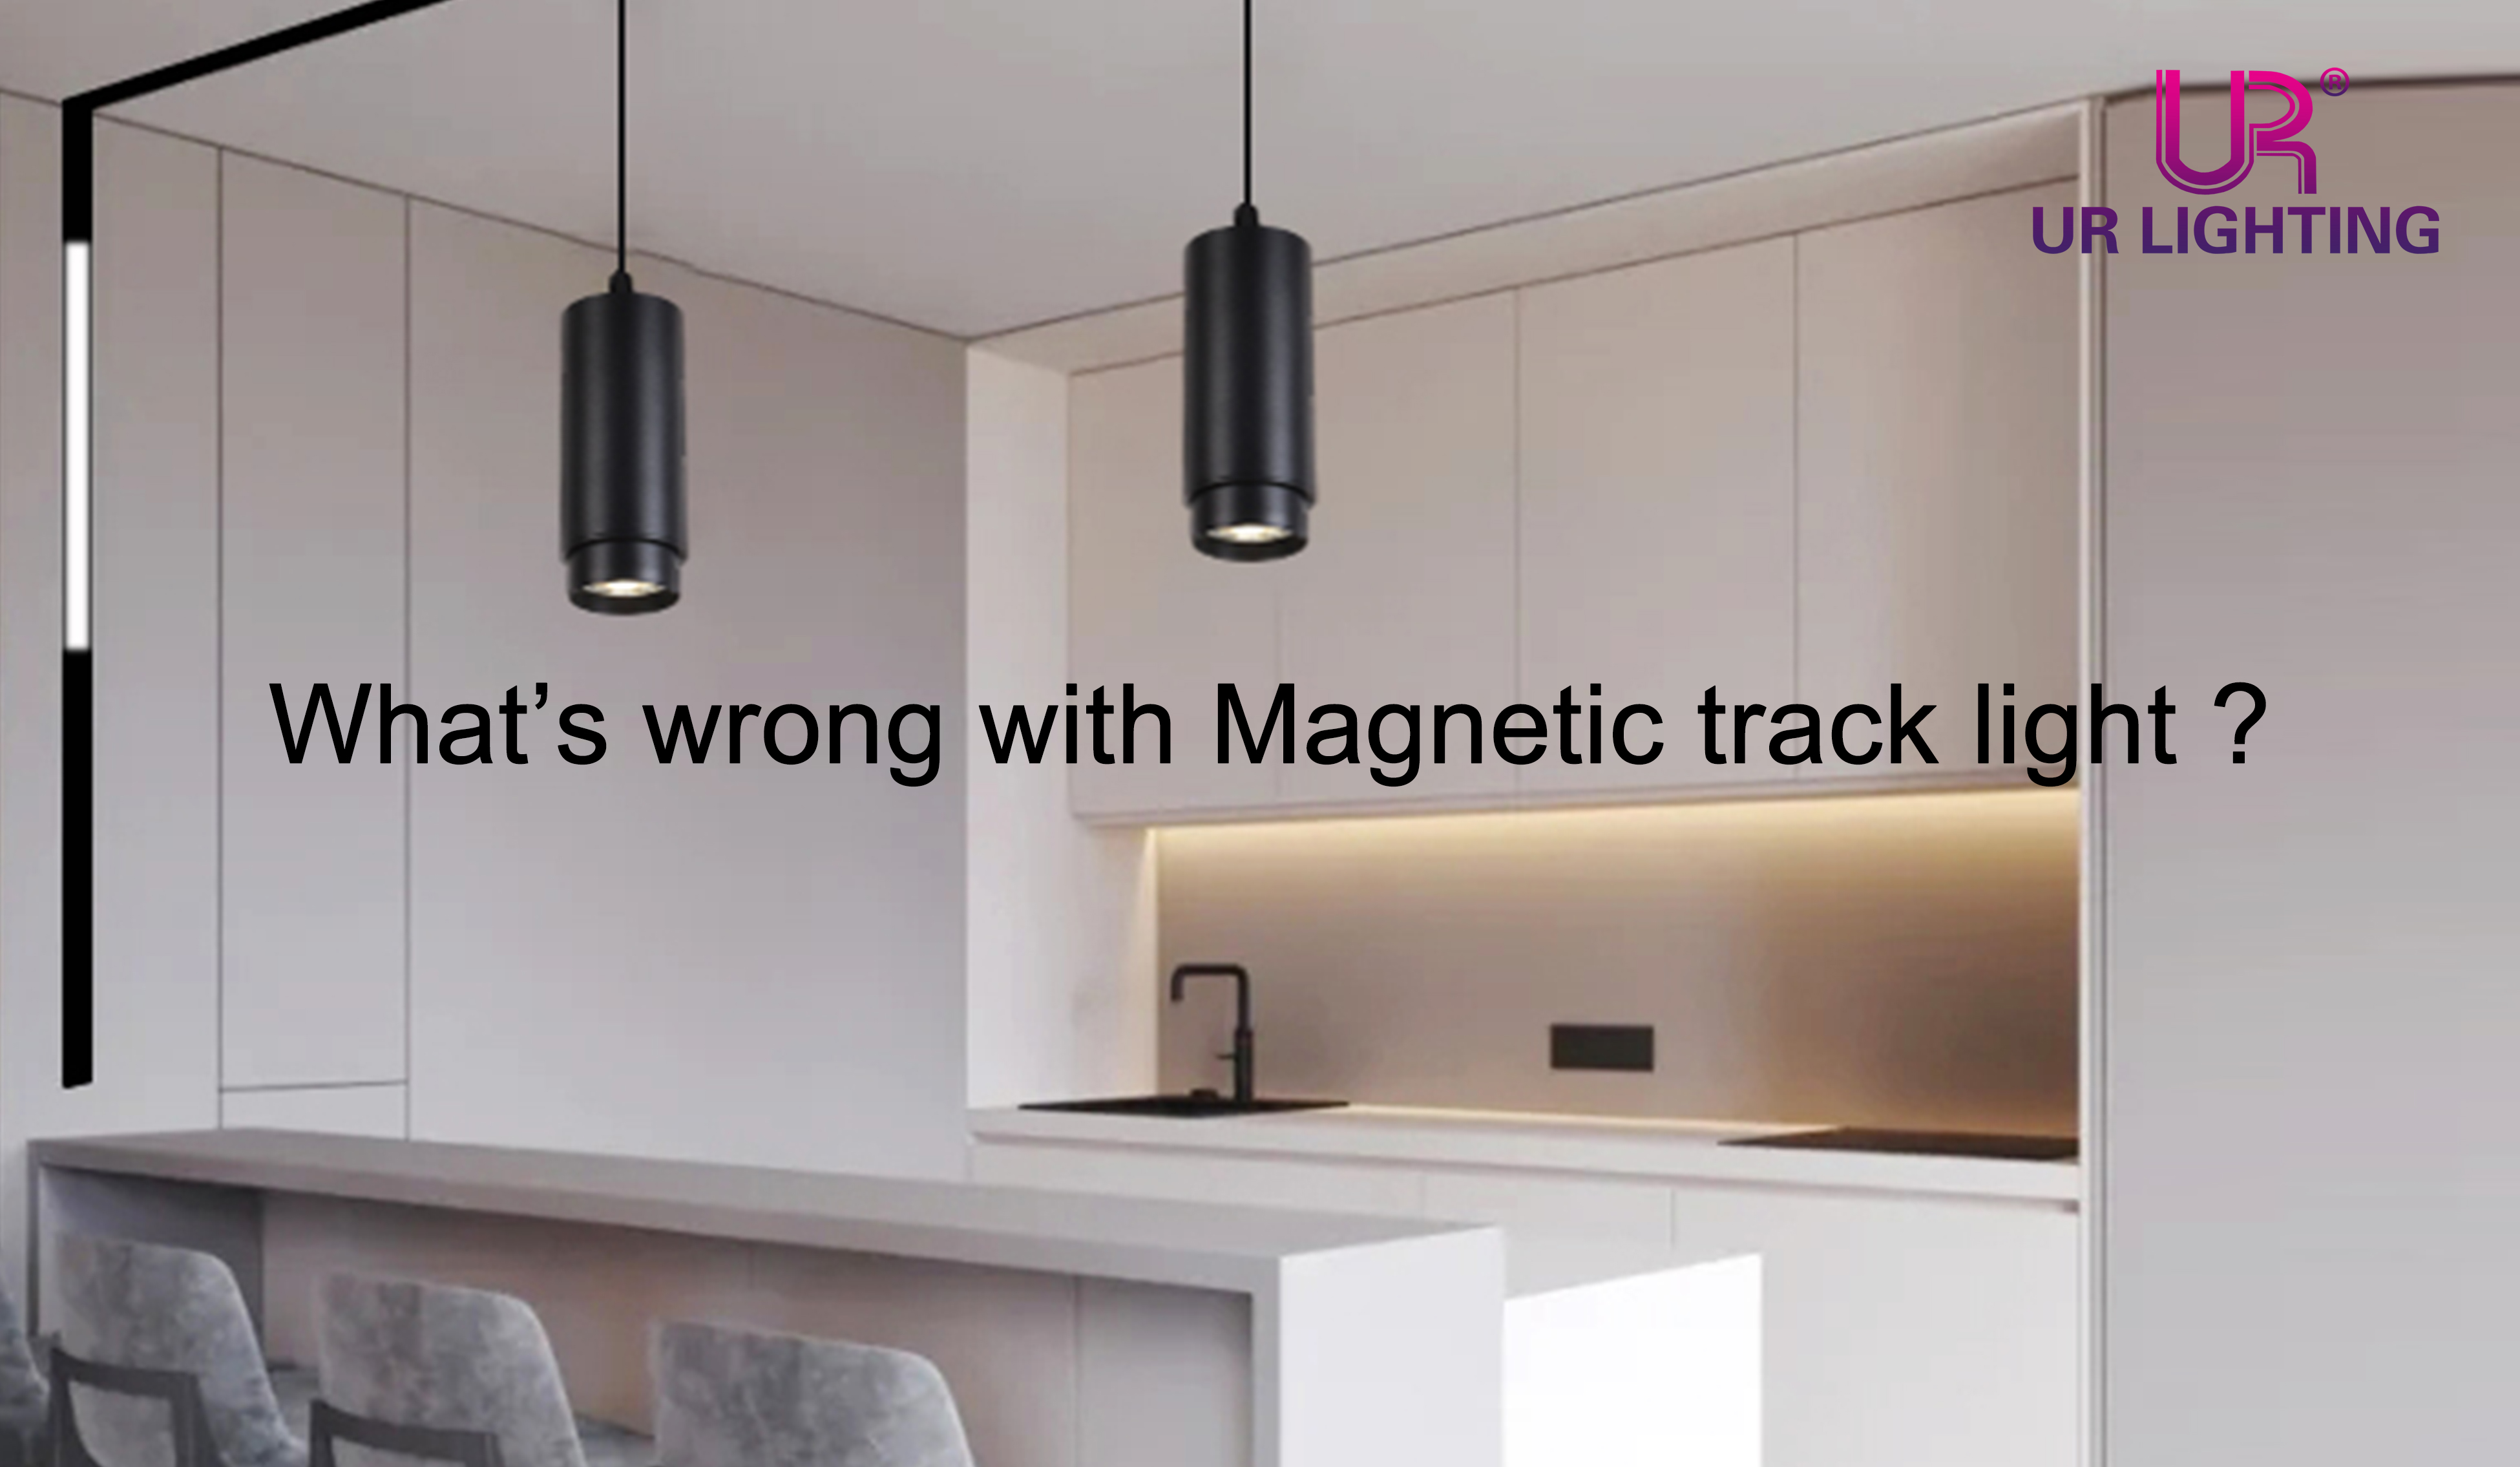 What’s wrong with Magnetic track light?